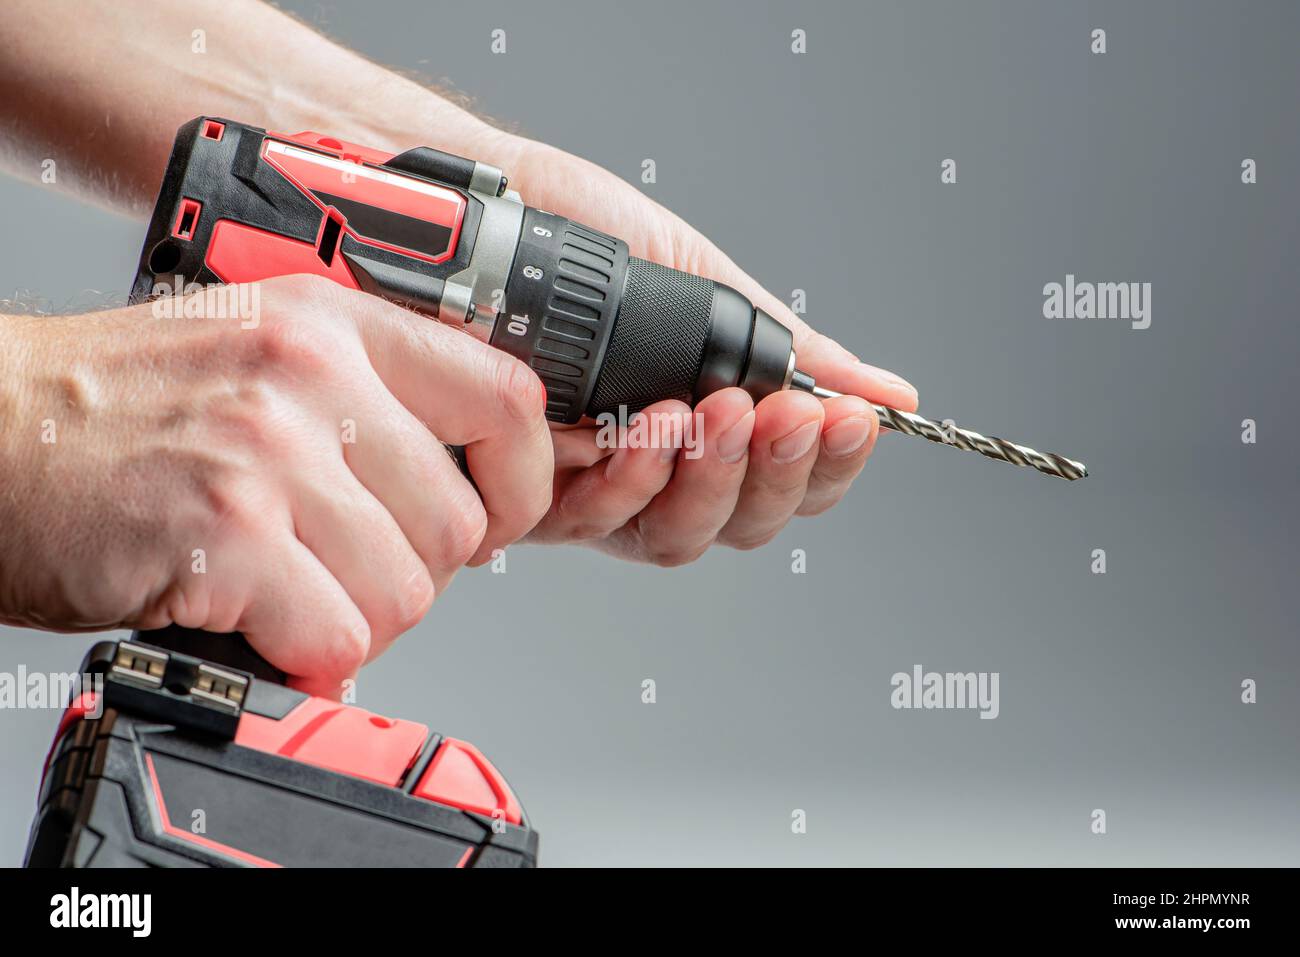 The man's hands install the drill into the drill, the hands take the drill and install it into the electric drill. Cordless tool on a gray background Stock Photo